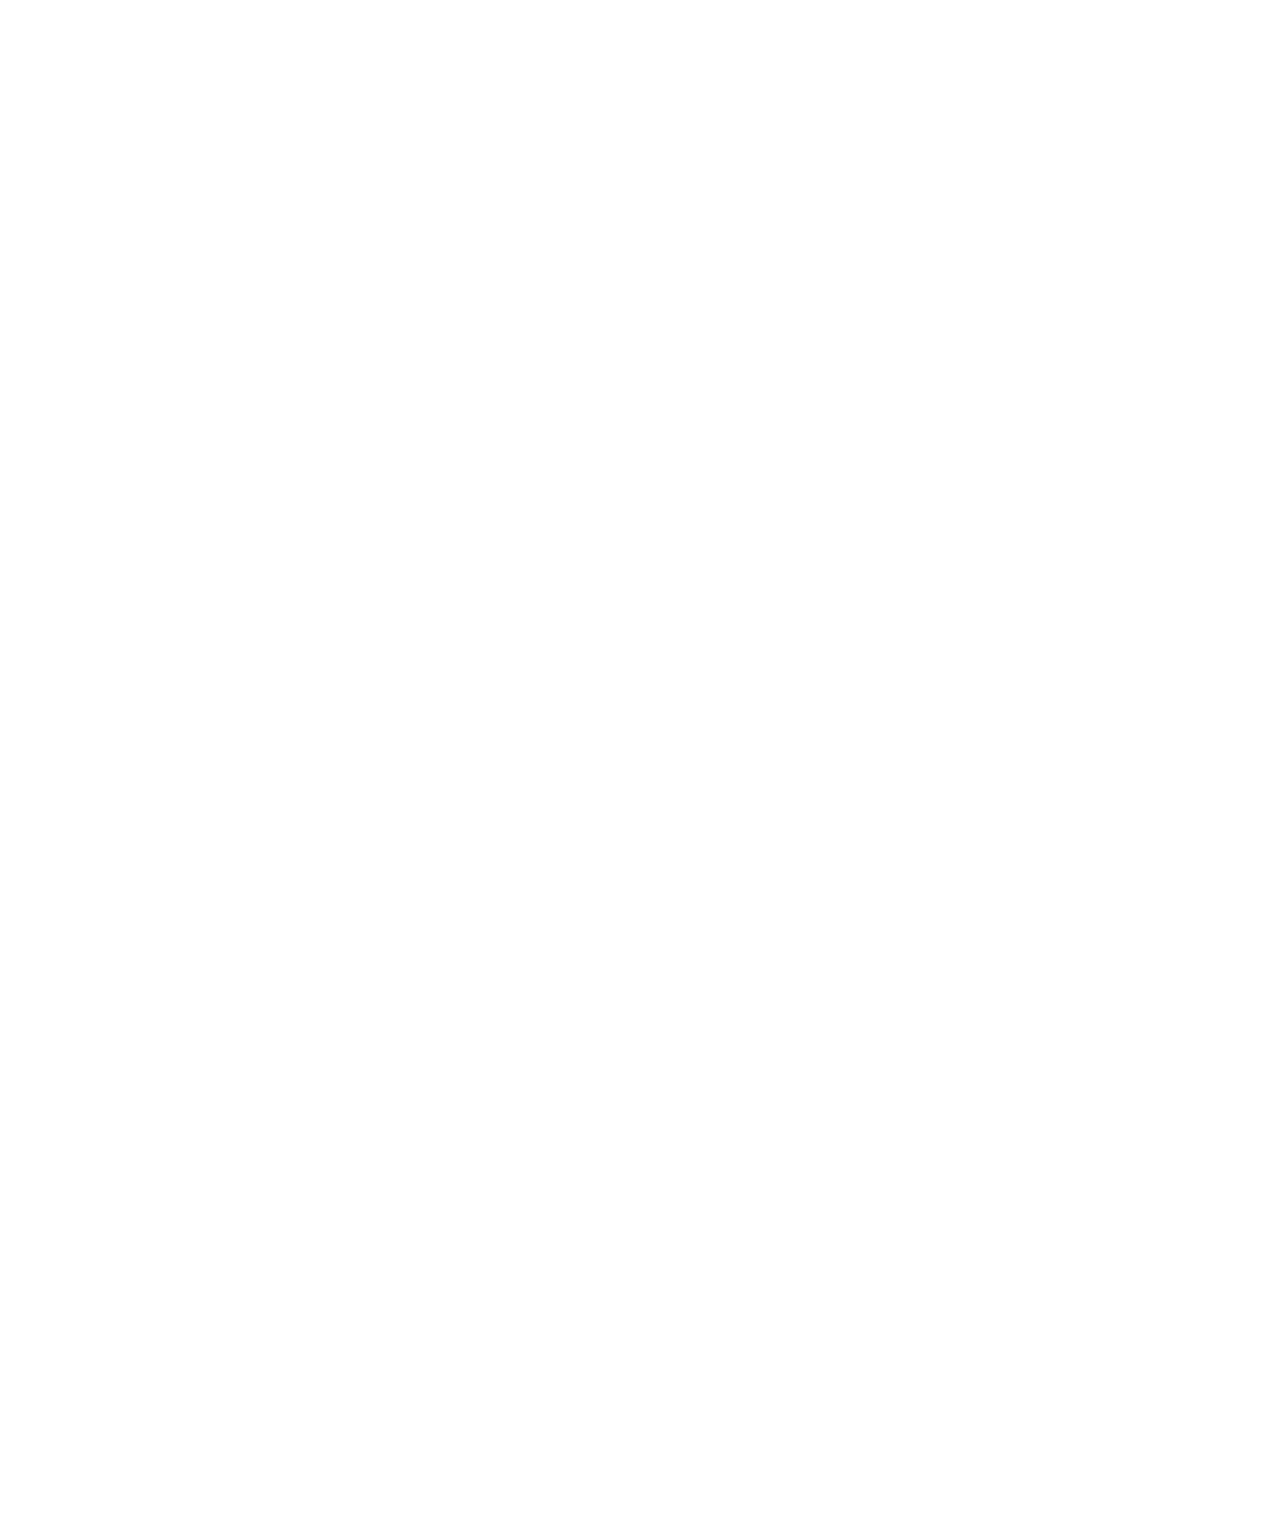 Dow Jones & Company logo in transparent PNG and vectorized SVG formats